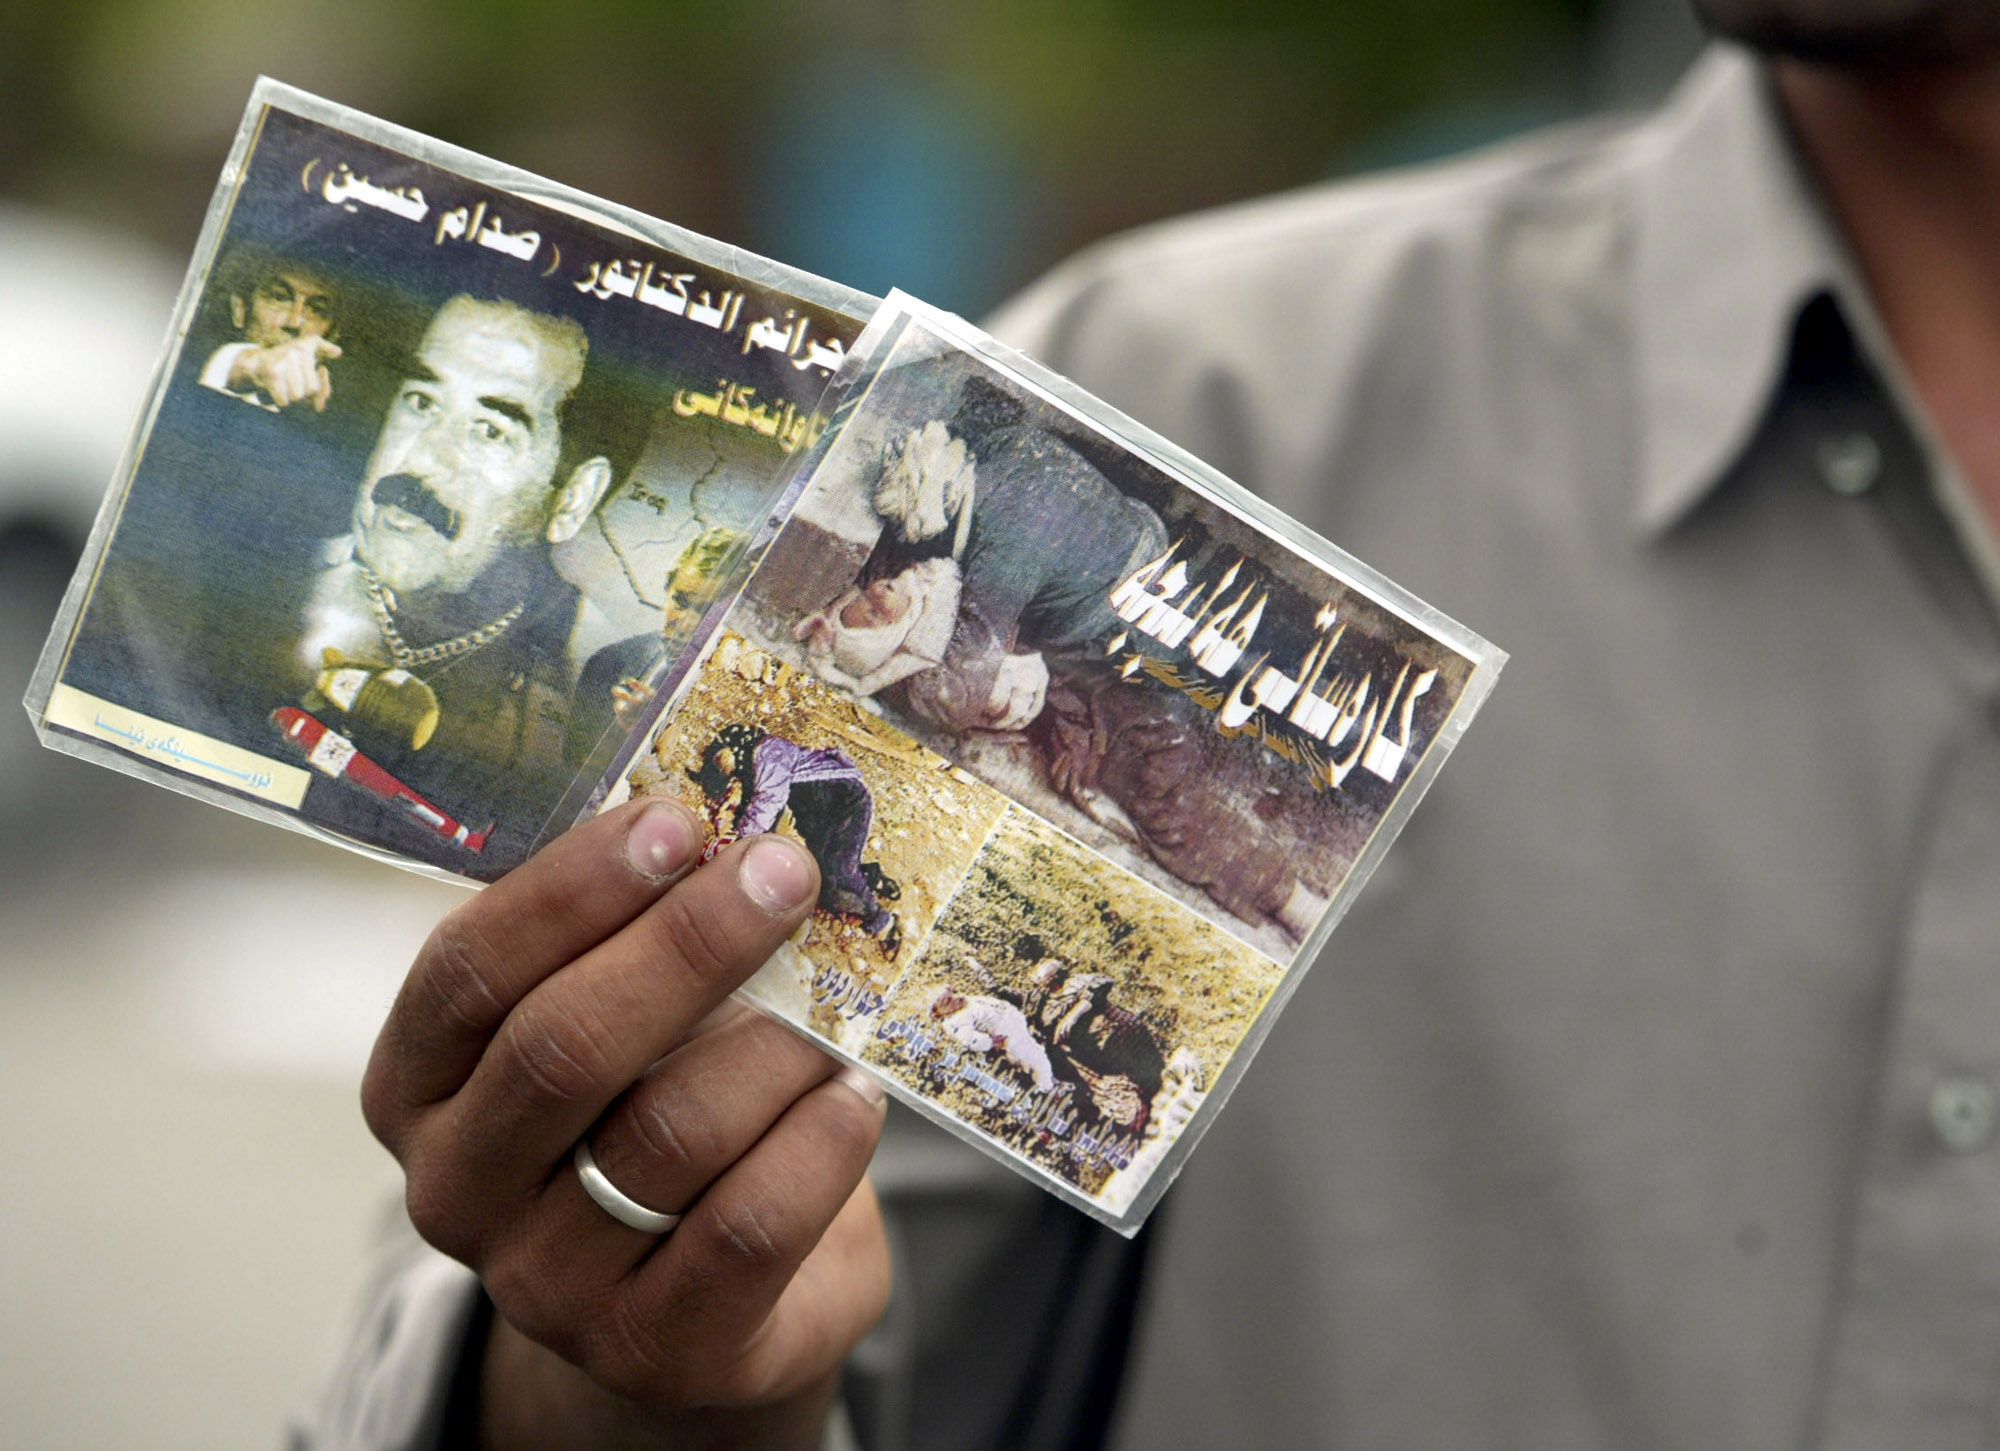 An Iraqi street vendor holds video compact discs titled "crimes of the dictator Saddam Hussein" in Kurdish